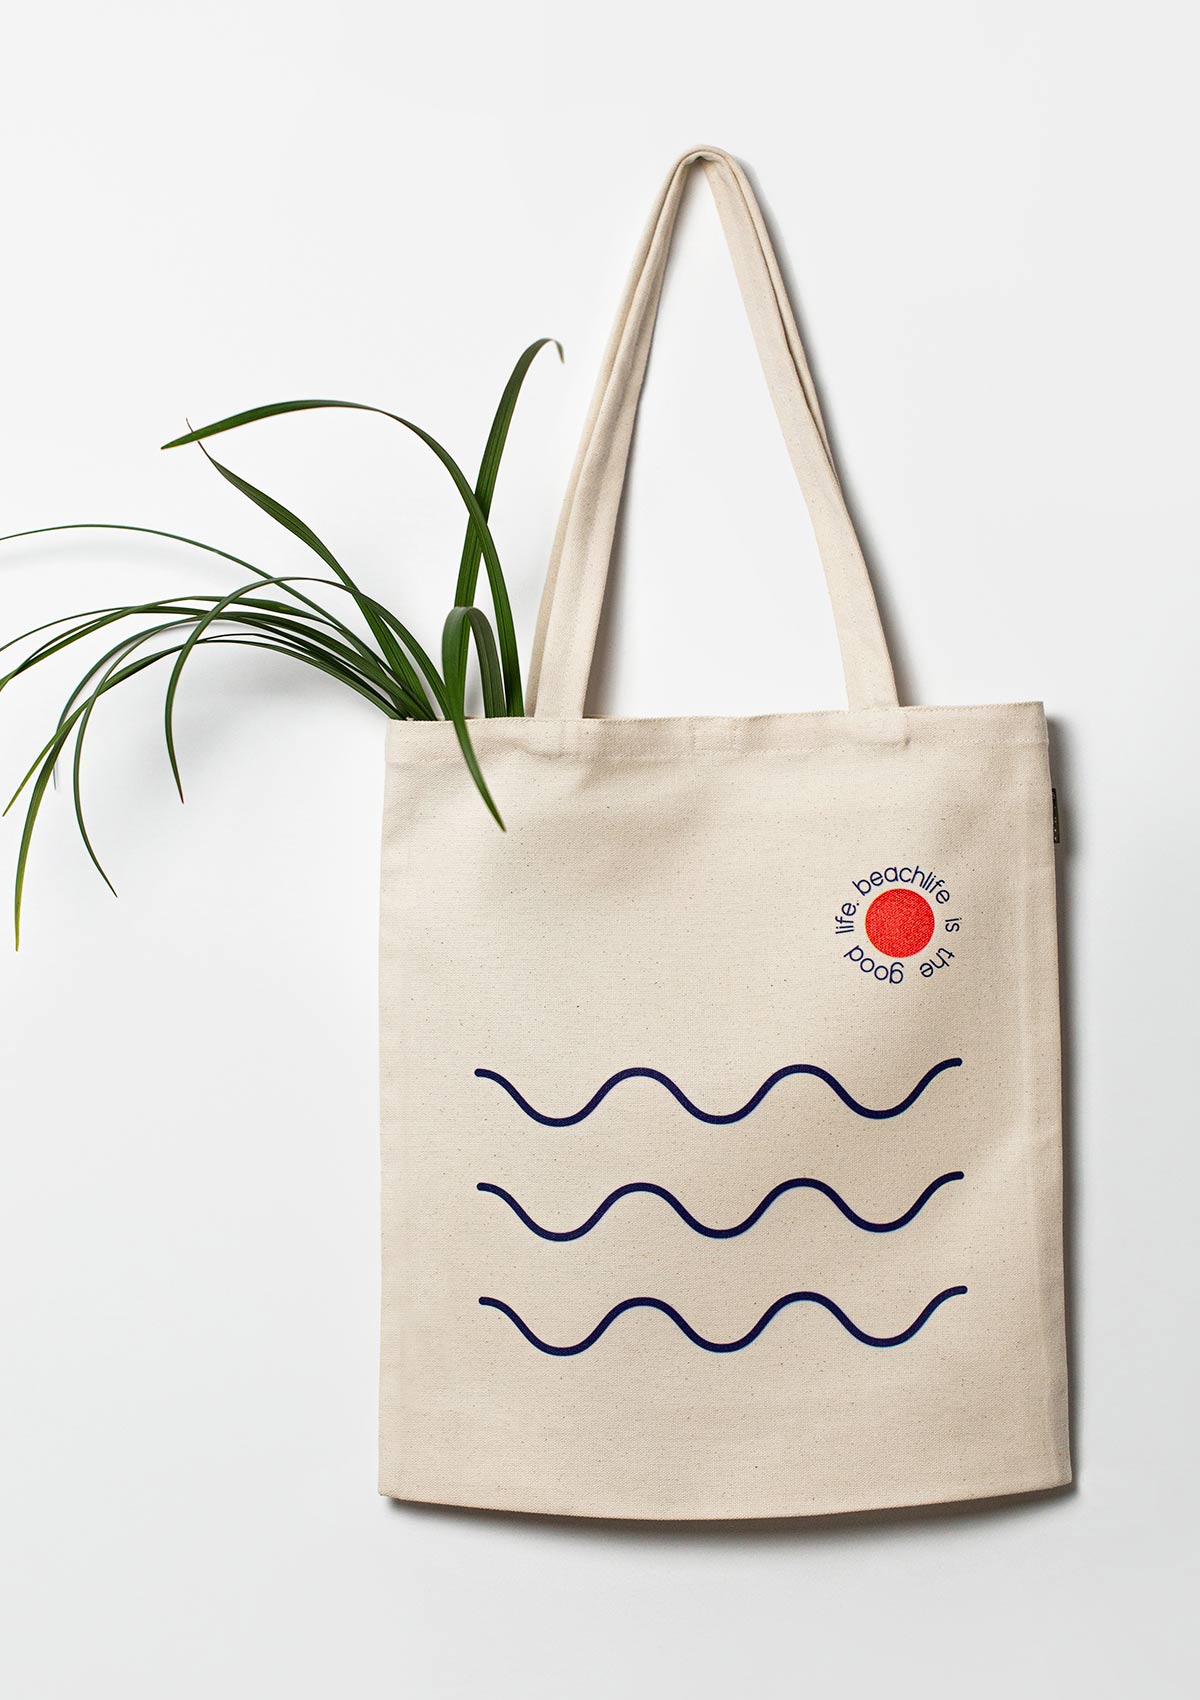 Beige cotton tote bag with three wavy bluemarine lines placed horizontally and writing around a small orange circle.